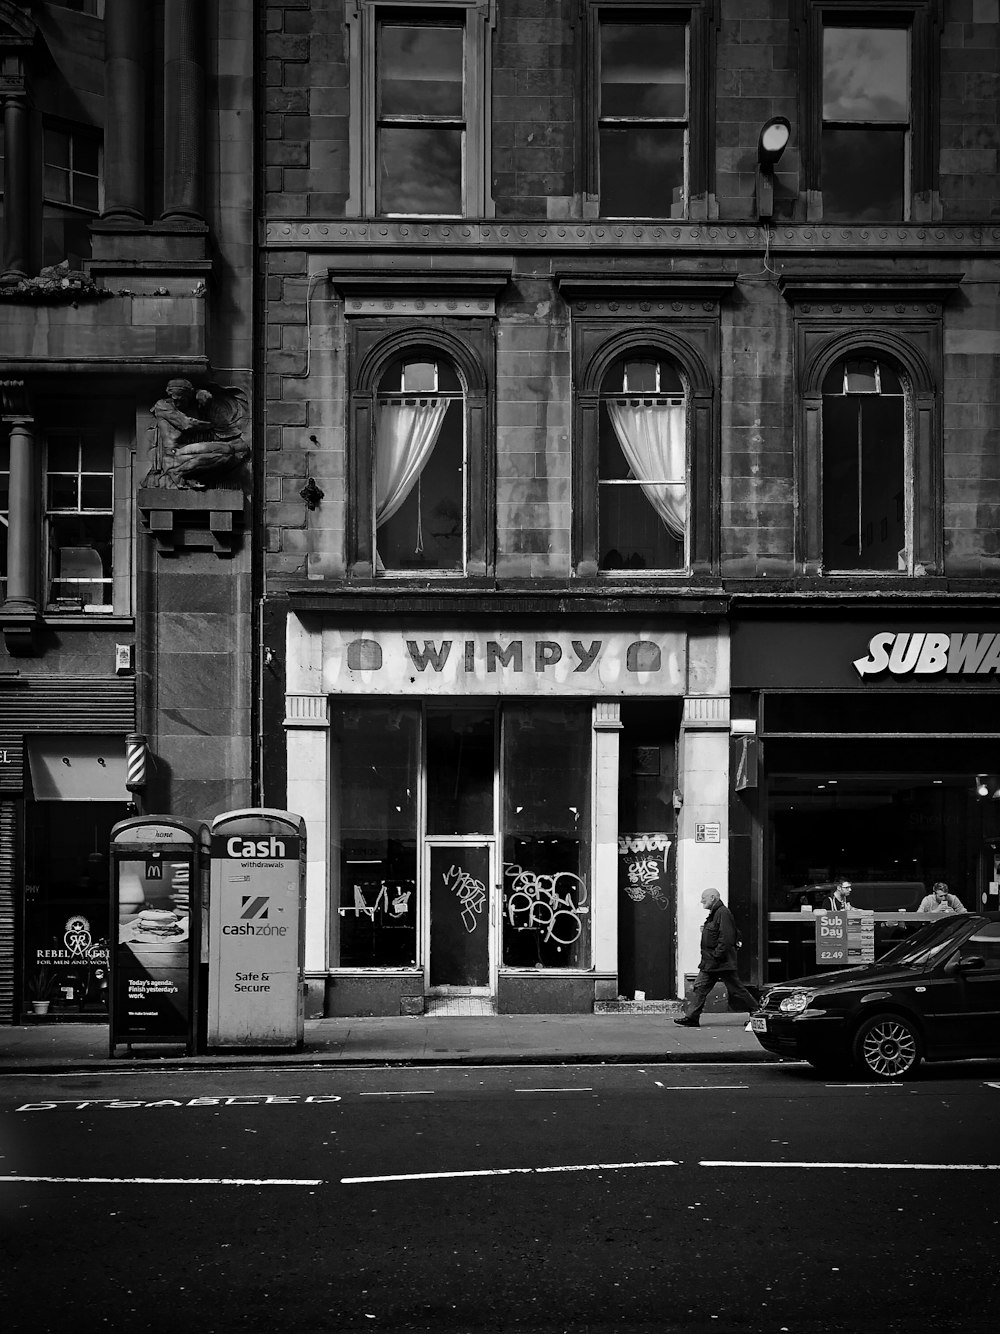 grayscale photo of person waking on street beside Wimpy boutique